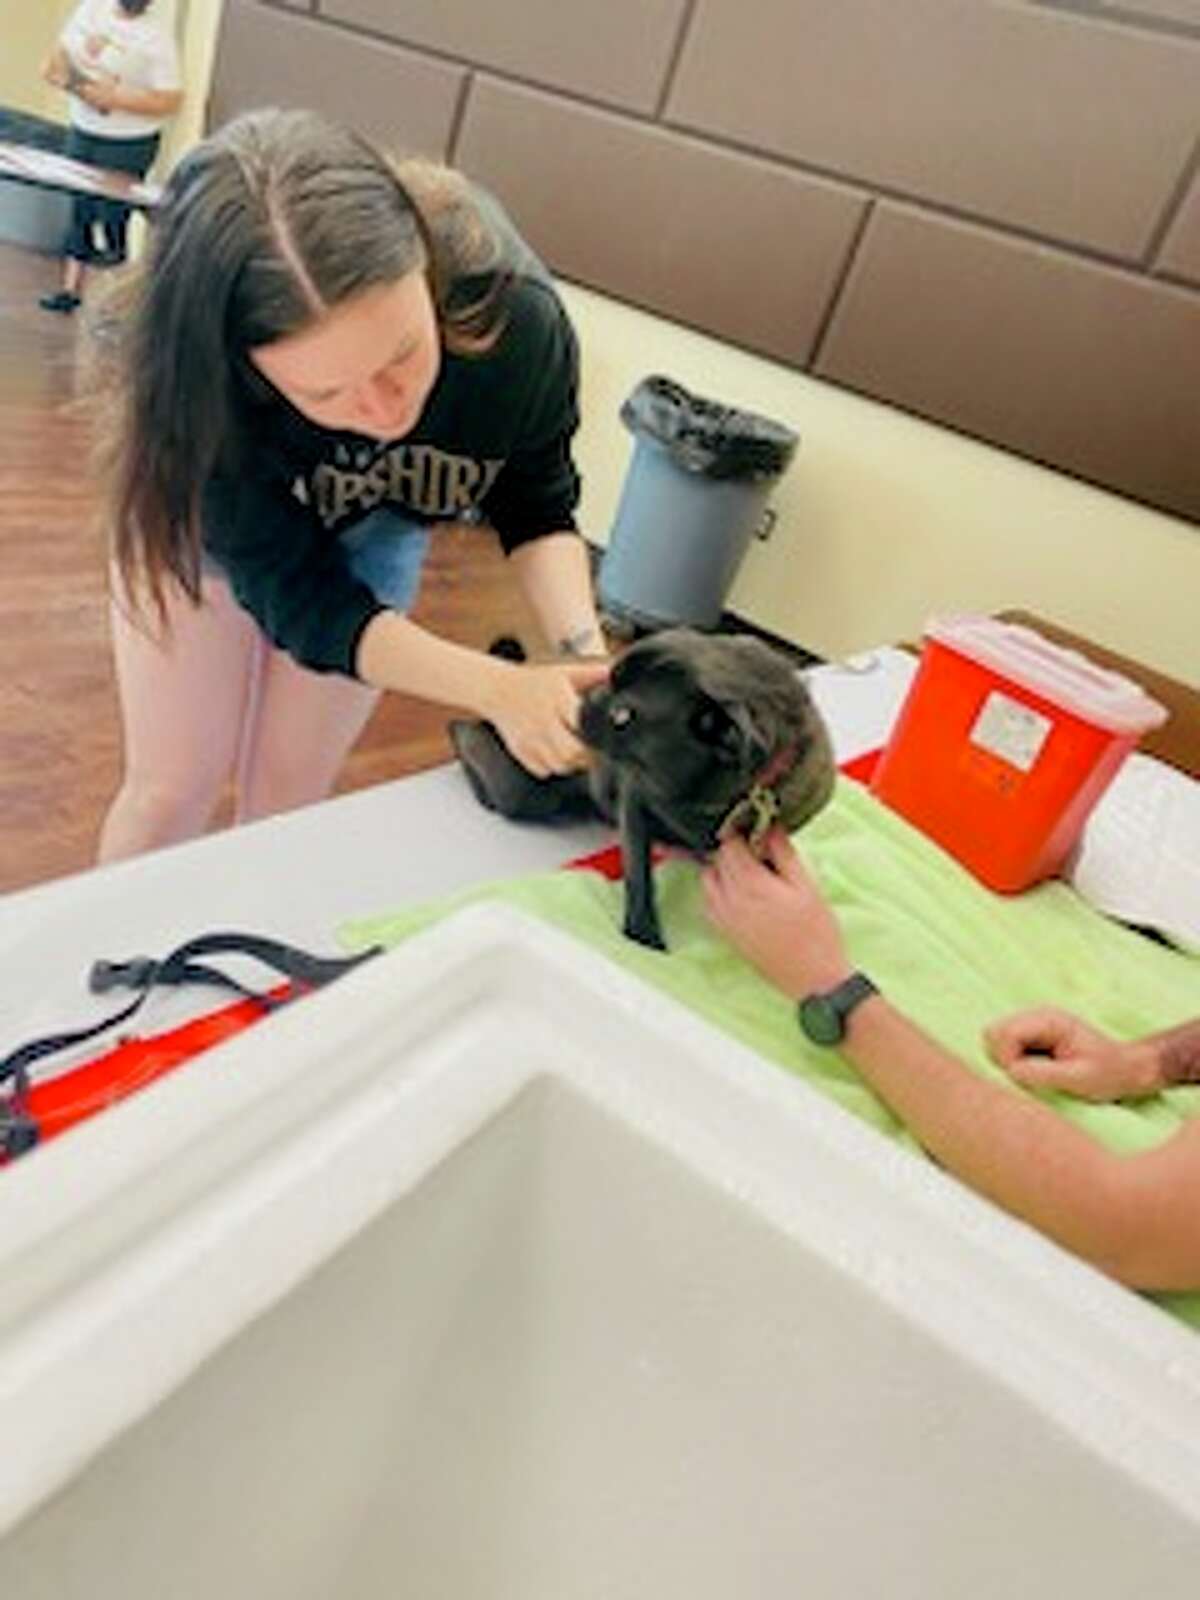 Pets Alive Laredo and co-sponsored by PetCo as the company provided grant money for the vaccines being administered were able to provide vaccines to approximately 150 dogs on Tuesday free of cost to their owners at the Fasken Recreation Center